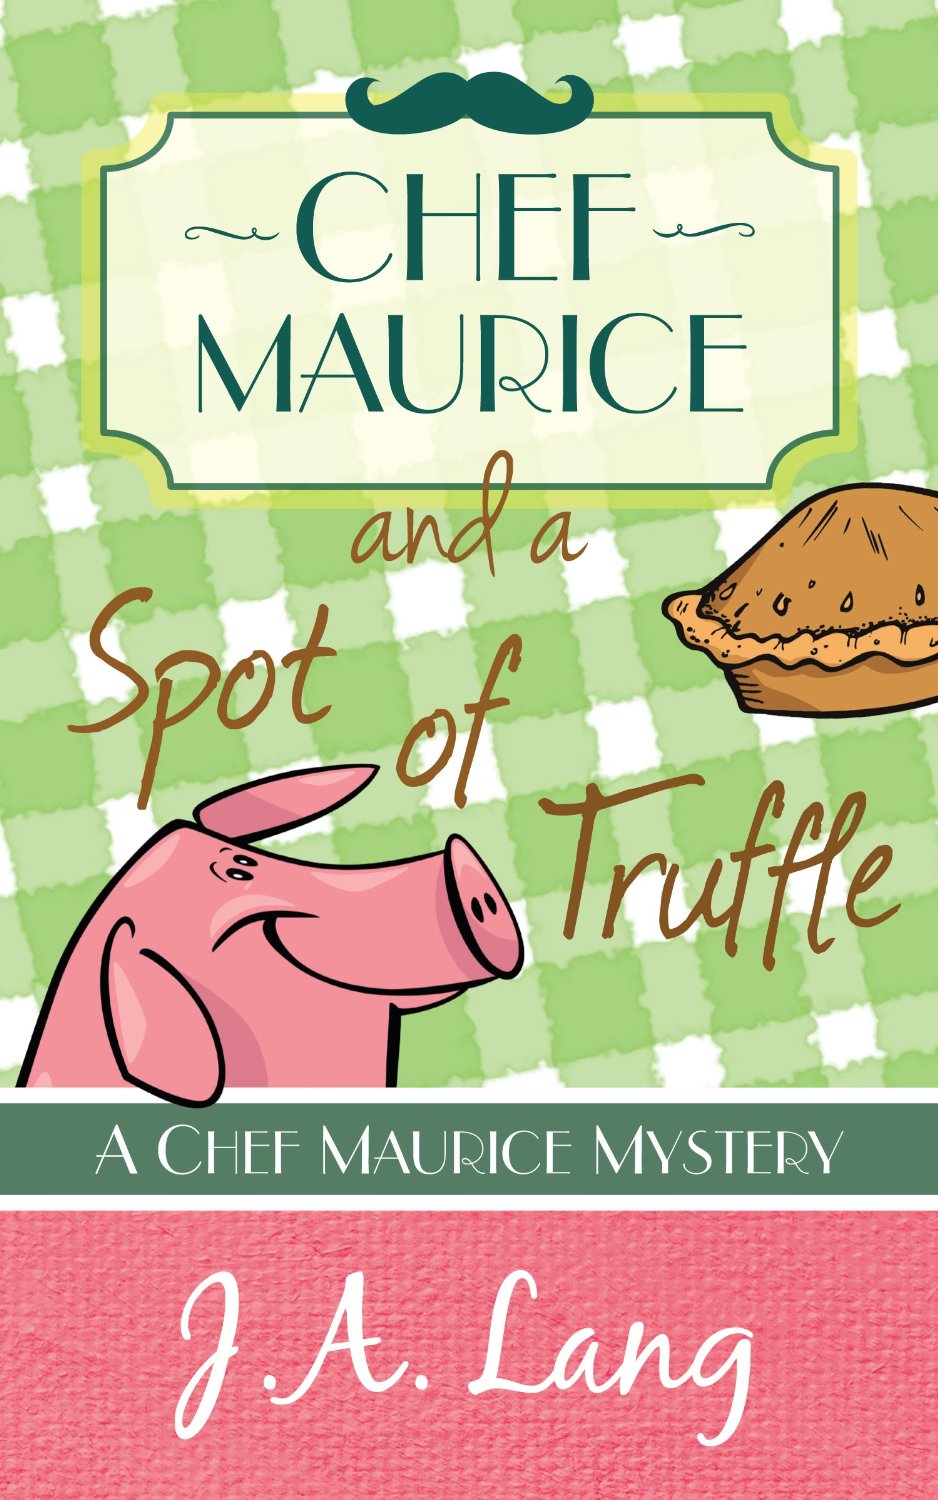 Chef Maurice and a Spot of Truffle (Chef Maurice Cotswold Mysteries Book 1) by J.A. Lang